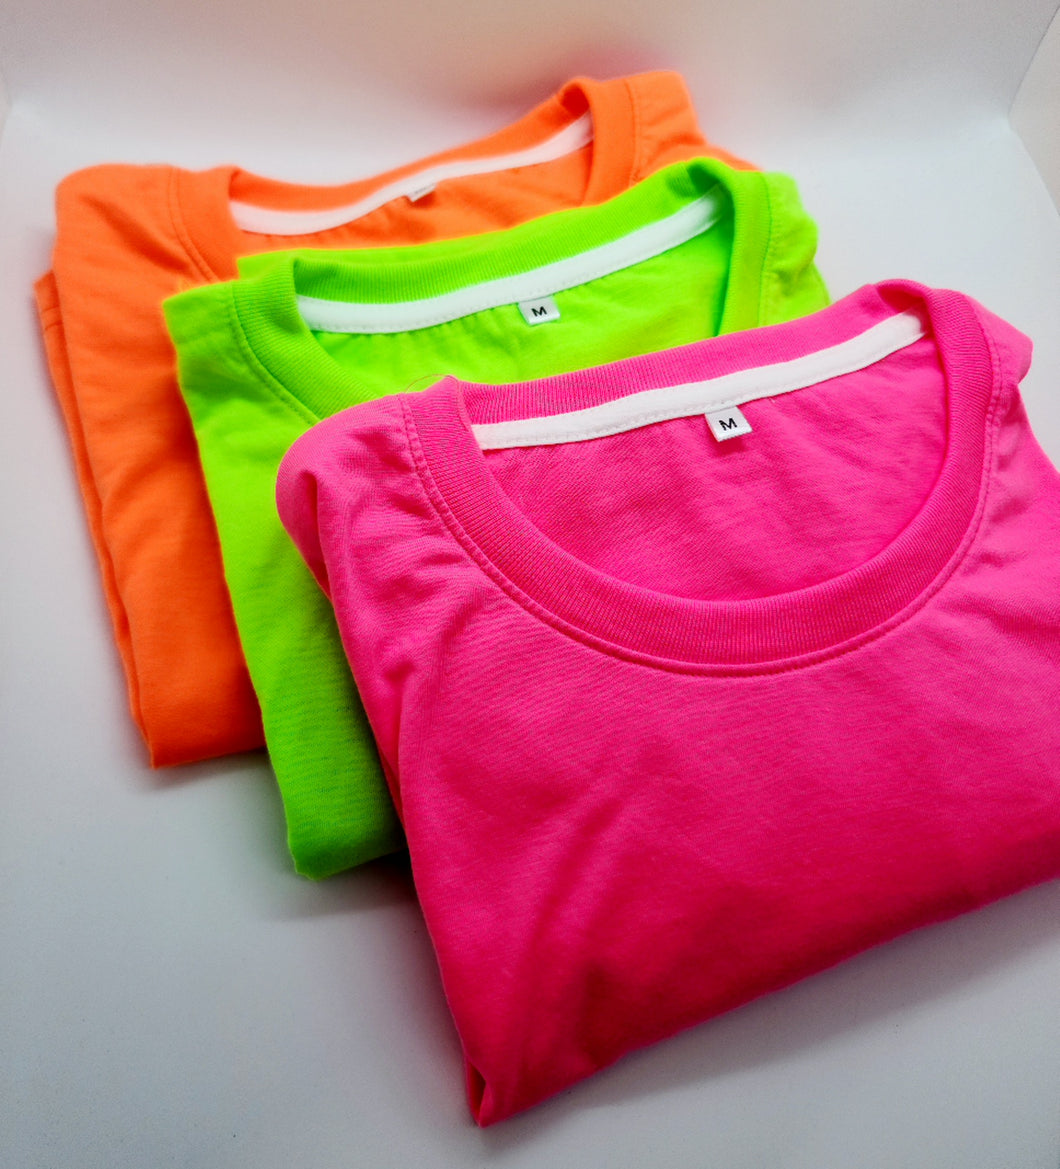 NEON MUSCLE TANK IN STOCK - Adults